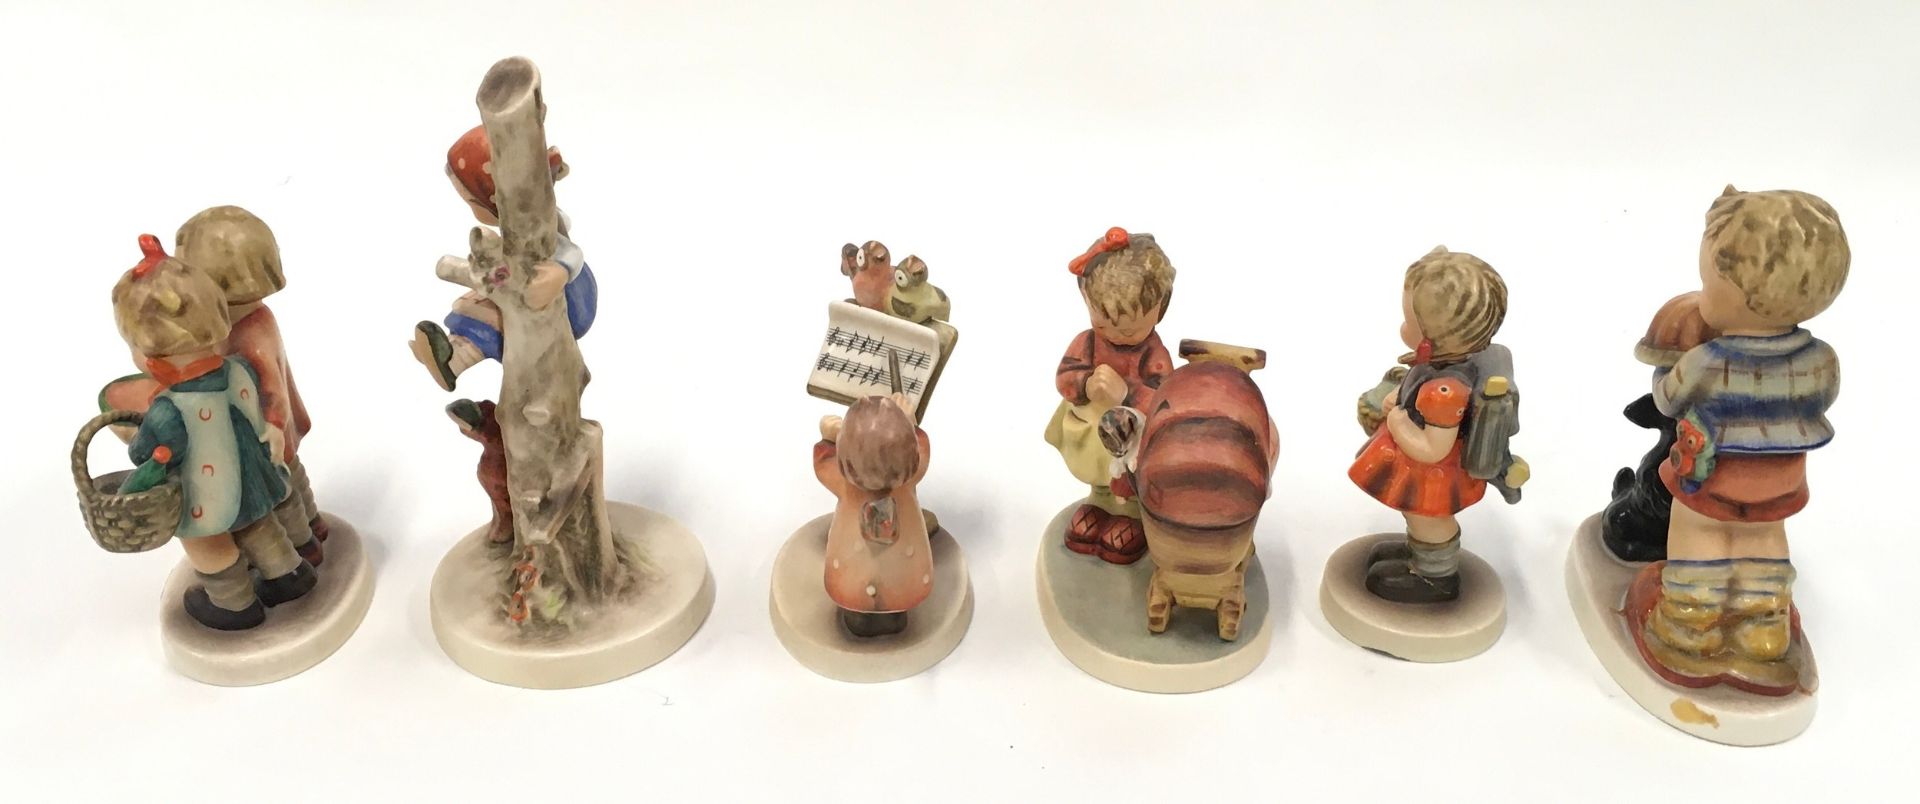 Goebel/Hummel collection of figurines to include "Going to Grandma's" (6). - Image 2 of 5